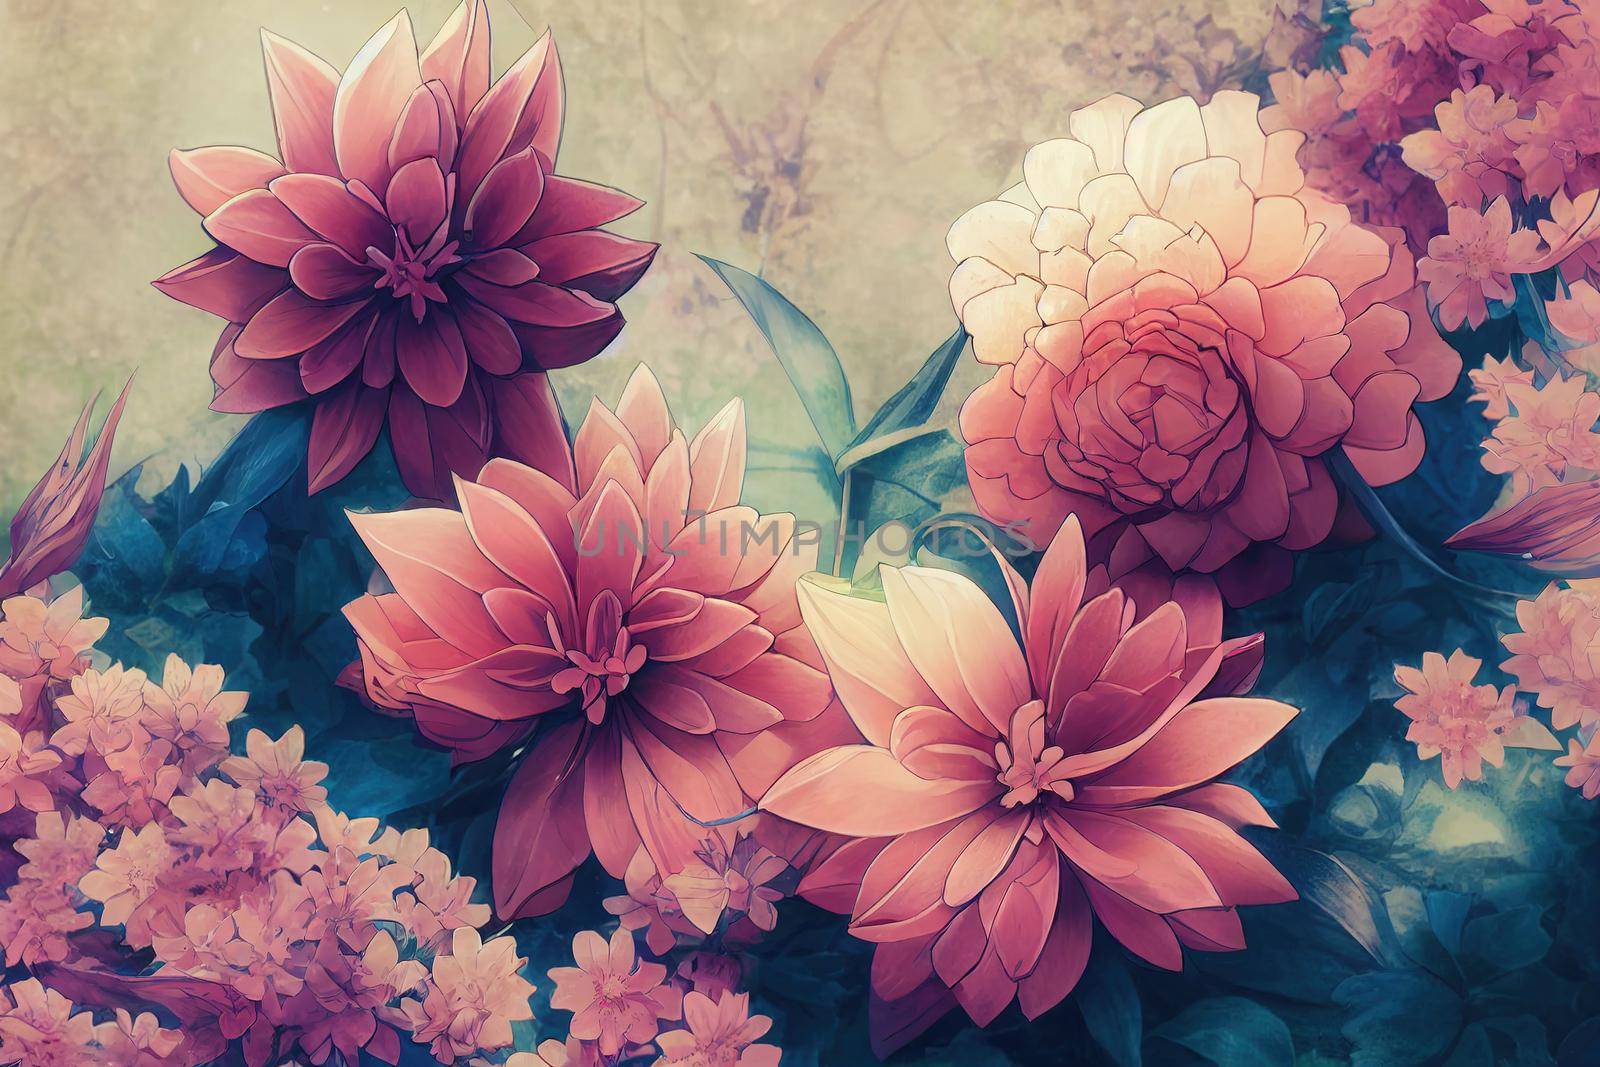 abstract pink flowers anime style. High quality 3d illustration